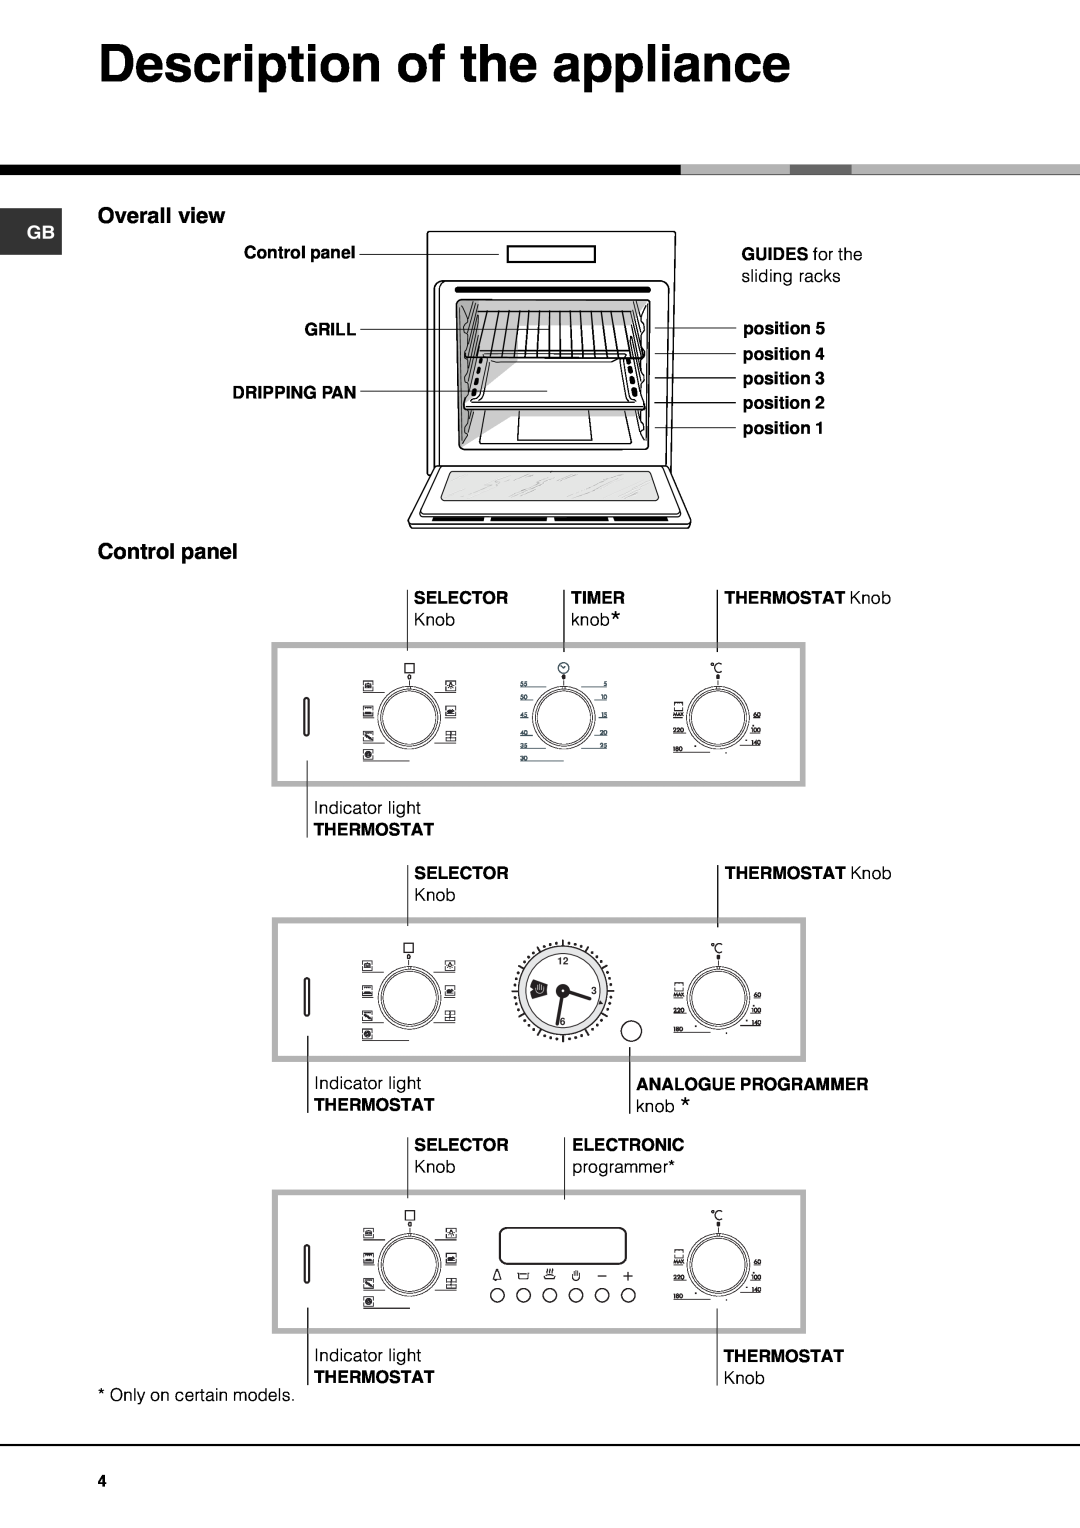 Hotpoint SE61X Description of the appliance, Overall view, Control panel GRILL DRIPPING PAN, Analogue Programmer 